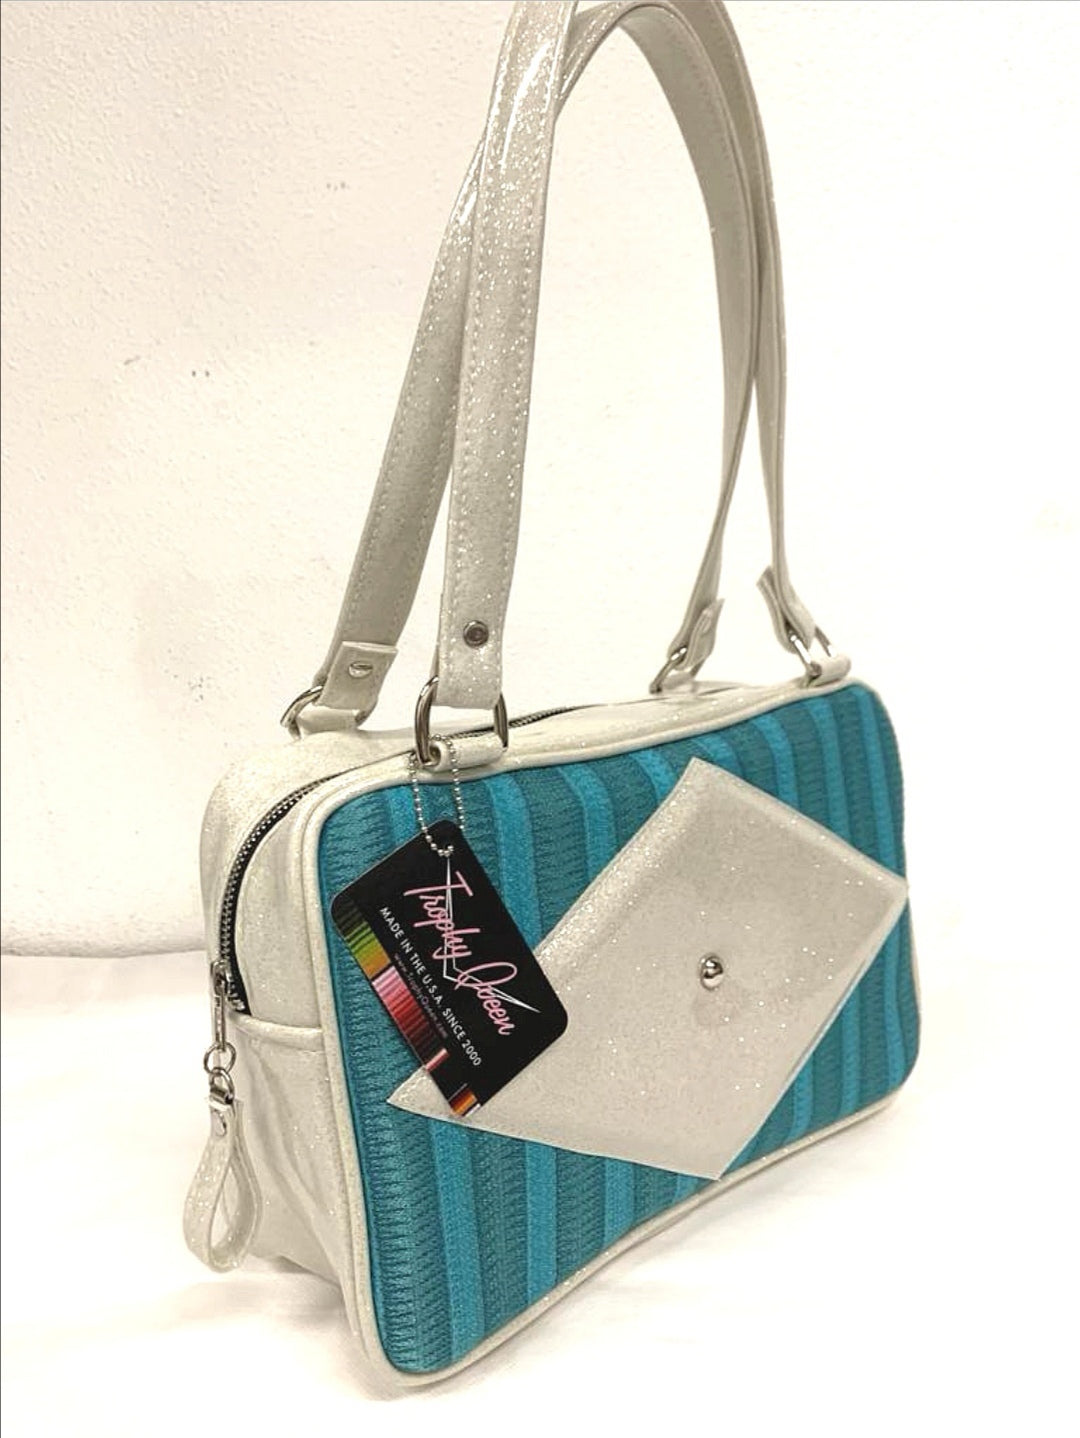 Bel Air Tote with Limited Edition Turquoise '65 Chevy Fabric and White Glitter Vinyl with Plush Leopard Lining. Made from NOS Vintage 1965 Vintage Chevy Upholstery Fabric, this unique bag has matching vinyl zipper pull, nickel feet, inside zipper pocket with serial number and open divided pocket with signature Trophy Queen label. The straps are approximately 25” and come with an extra set of replacement straps. Locally made and ships from California.